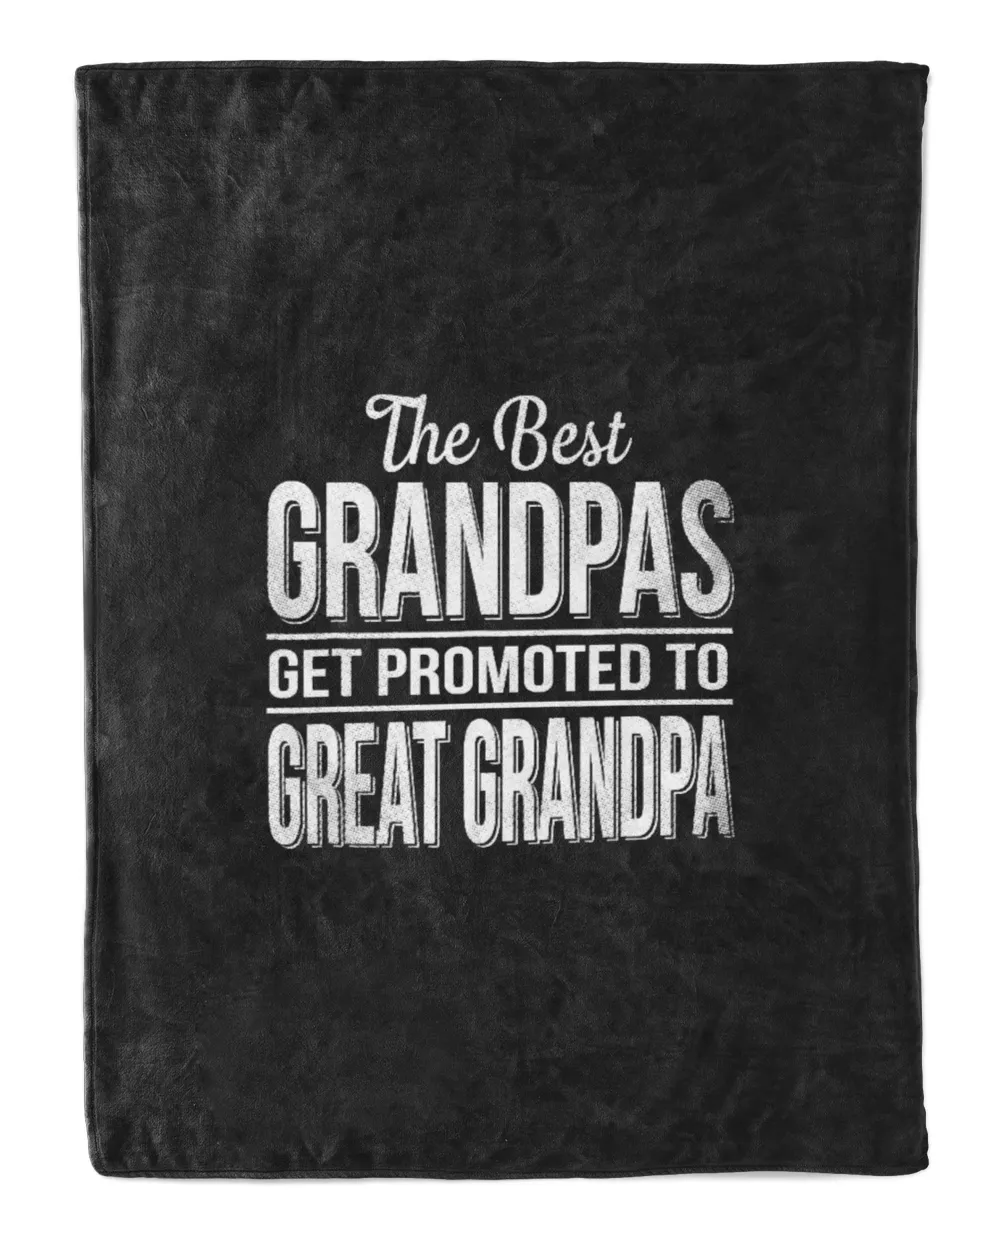 The only best grandpas get promoted to great grandpa